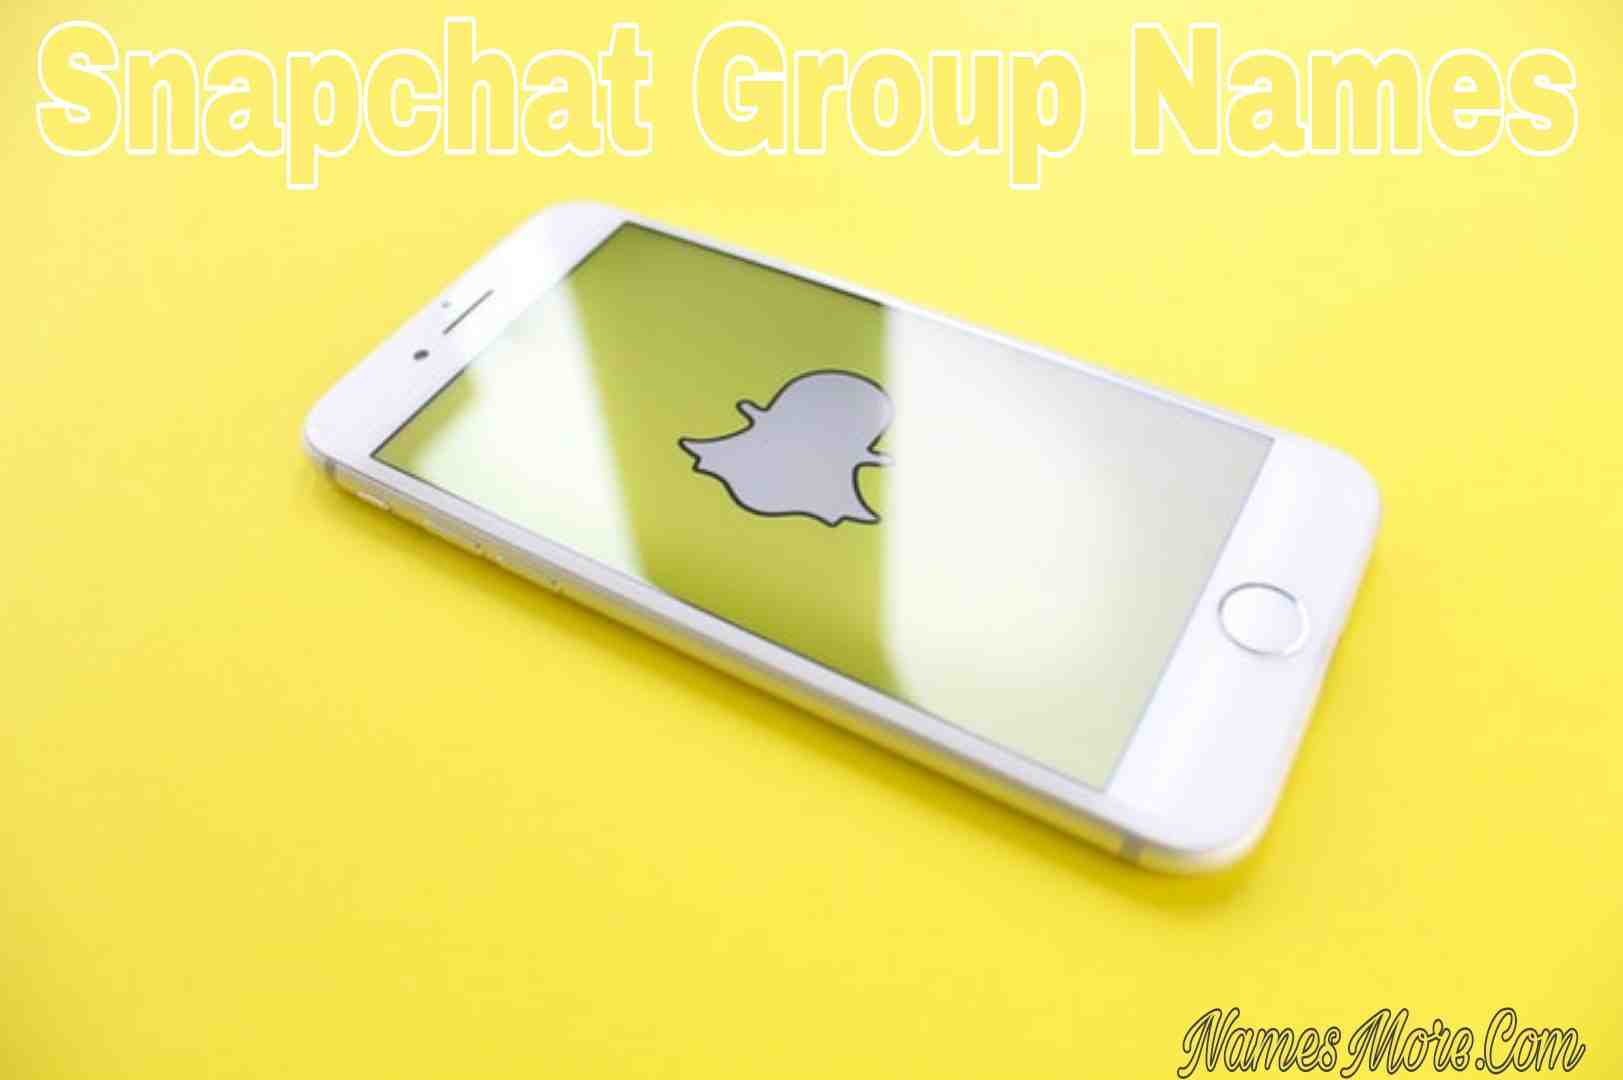 Featured Image for 950+ Snapchat Group Names [Funny & Clever]